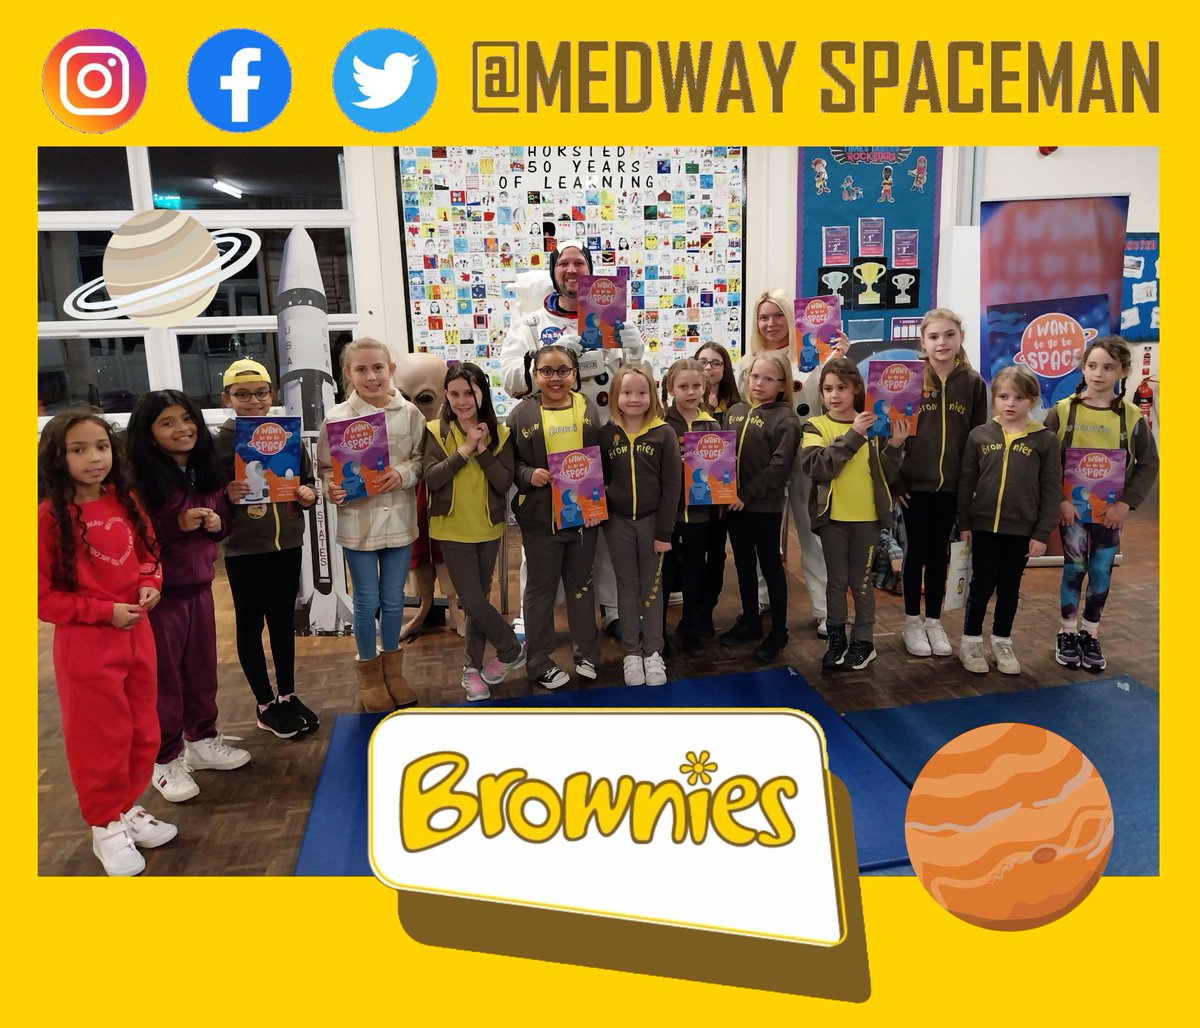 Our first Brownies Space Visit to 5th Chatham Brownies in Kent.  Thank you for hosting us, we had a brilliant time with everyone :)
@astro_timpeake @paul_bate @MelsGoodSpace 
#scouts #brownies #inspire #girlsinspace #iwanttogotospace #authorvisit #herovisits #medway